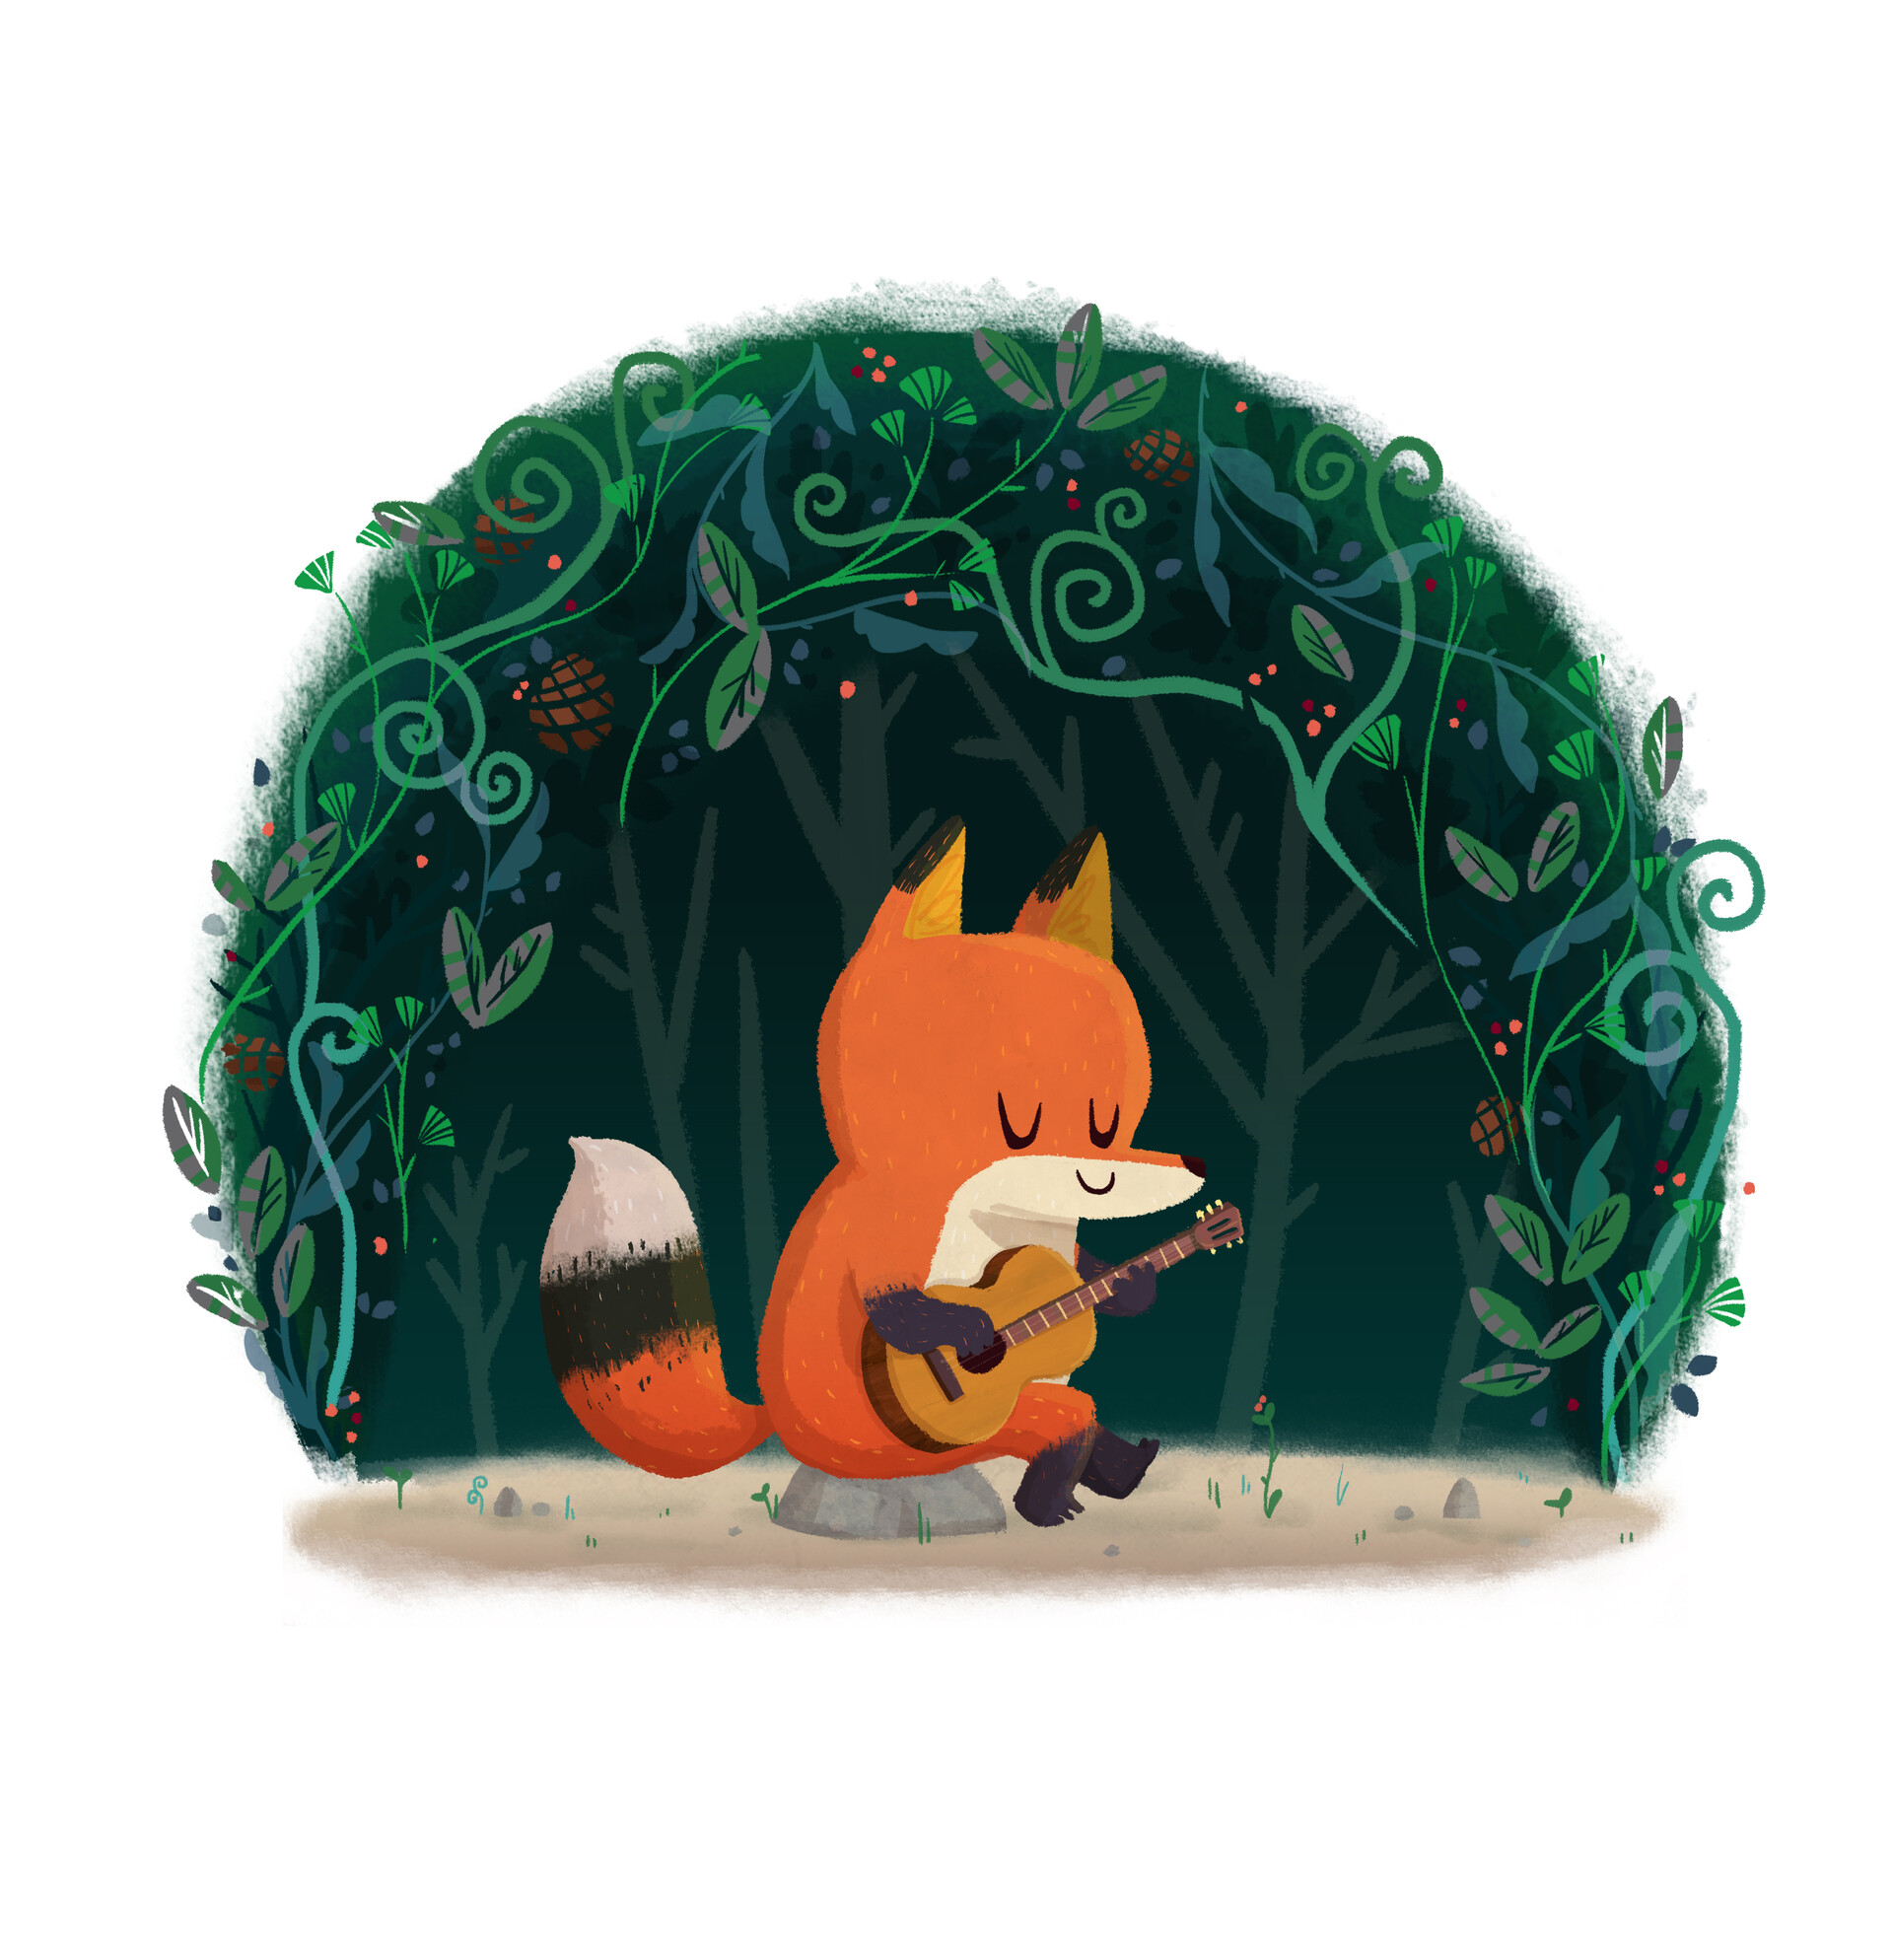 A Fox and her guitar